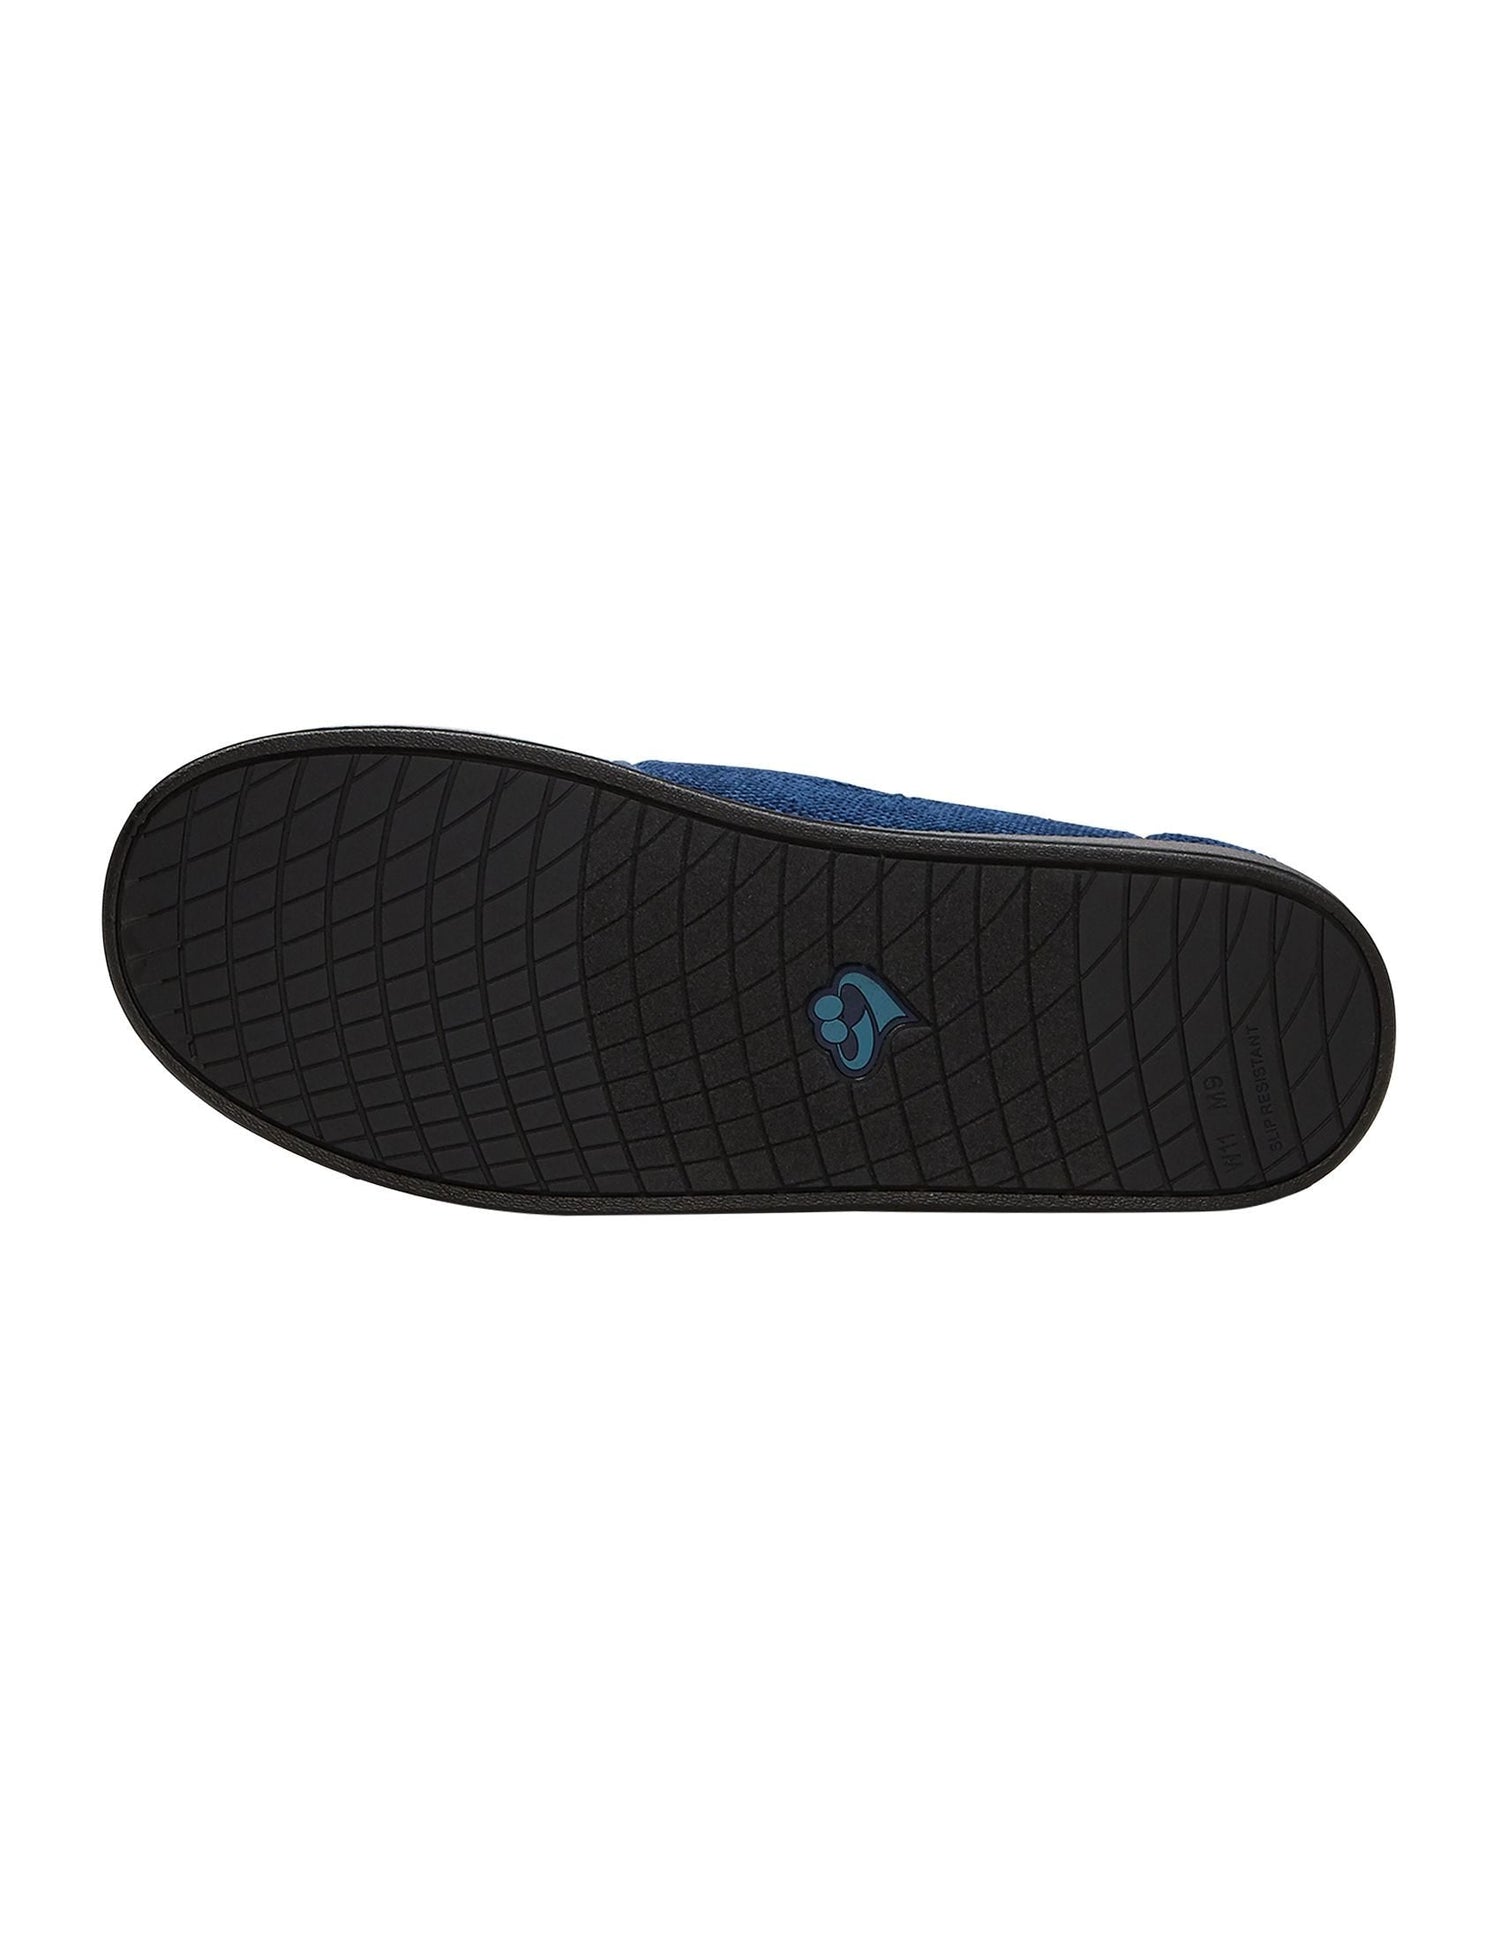 Bottom of wide indoor navy slippers with non-slip black soles and removable memory foam insoles